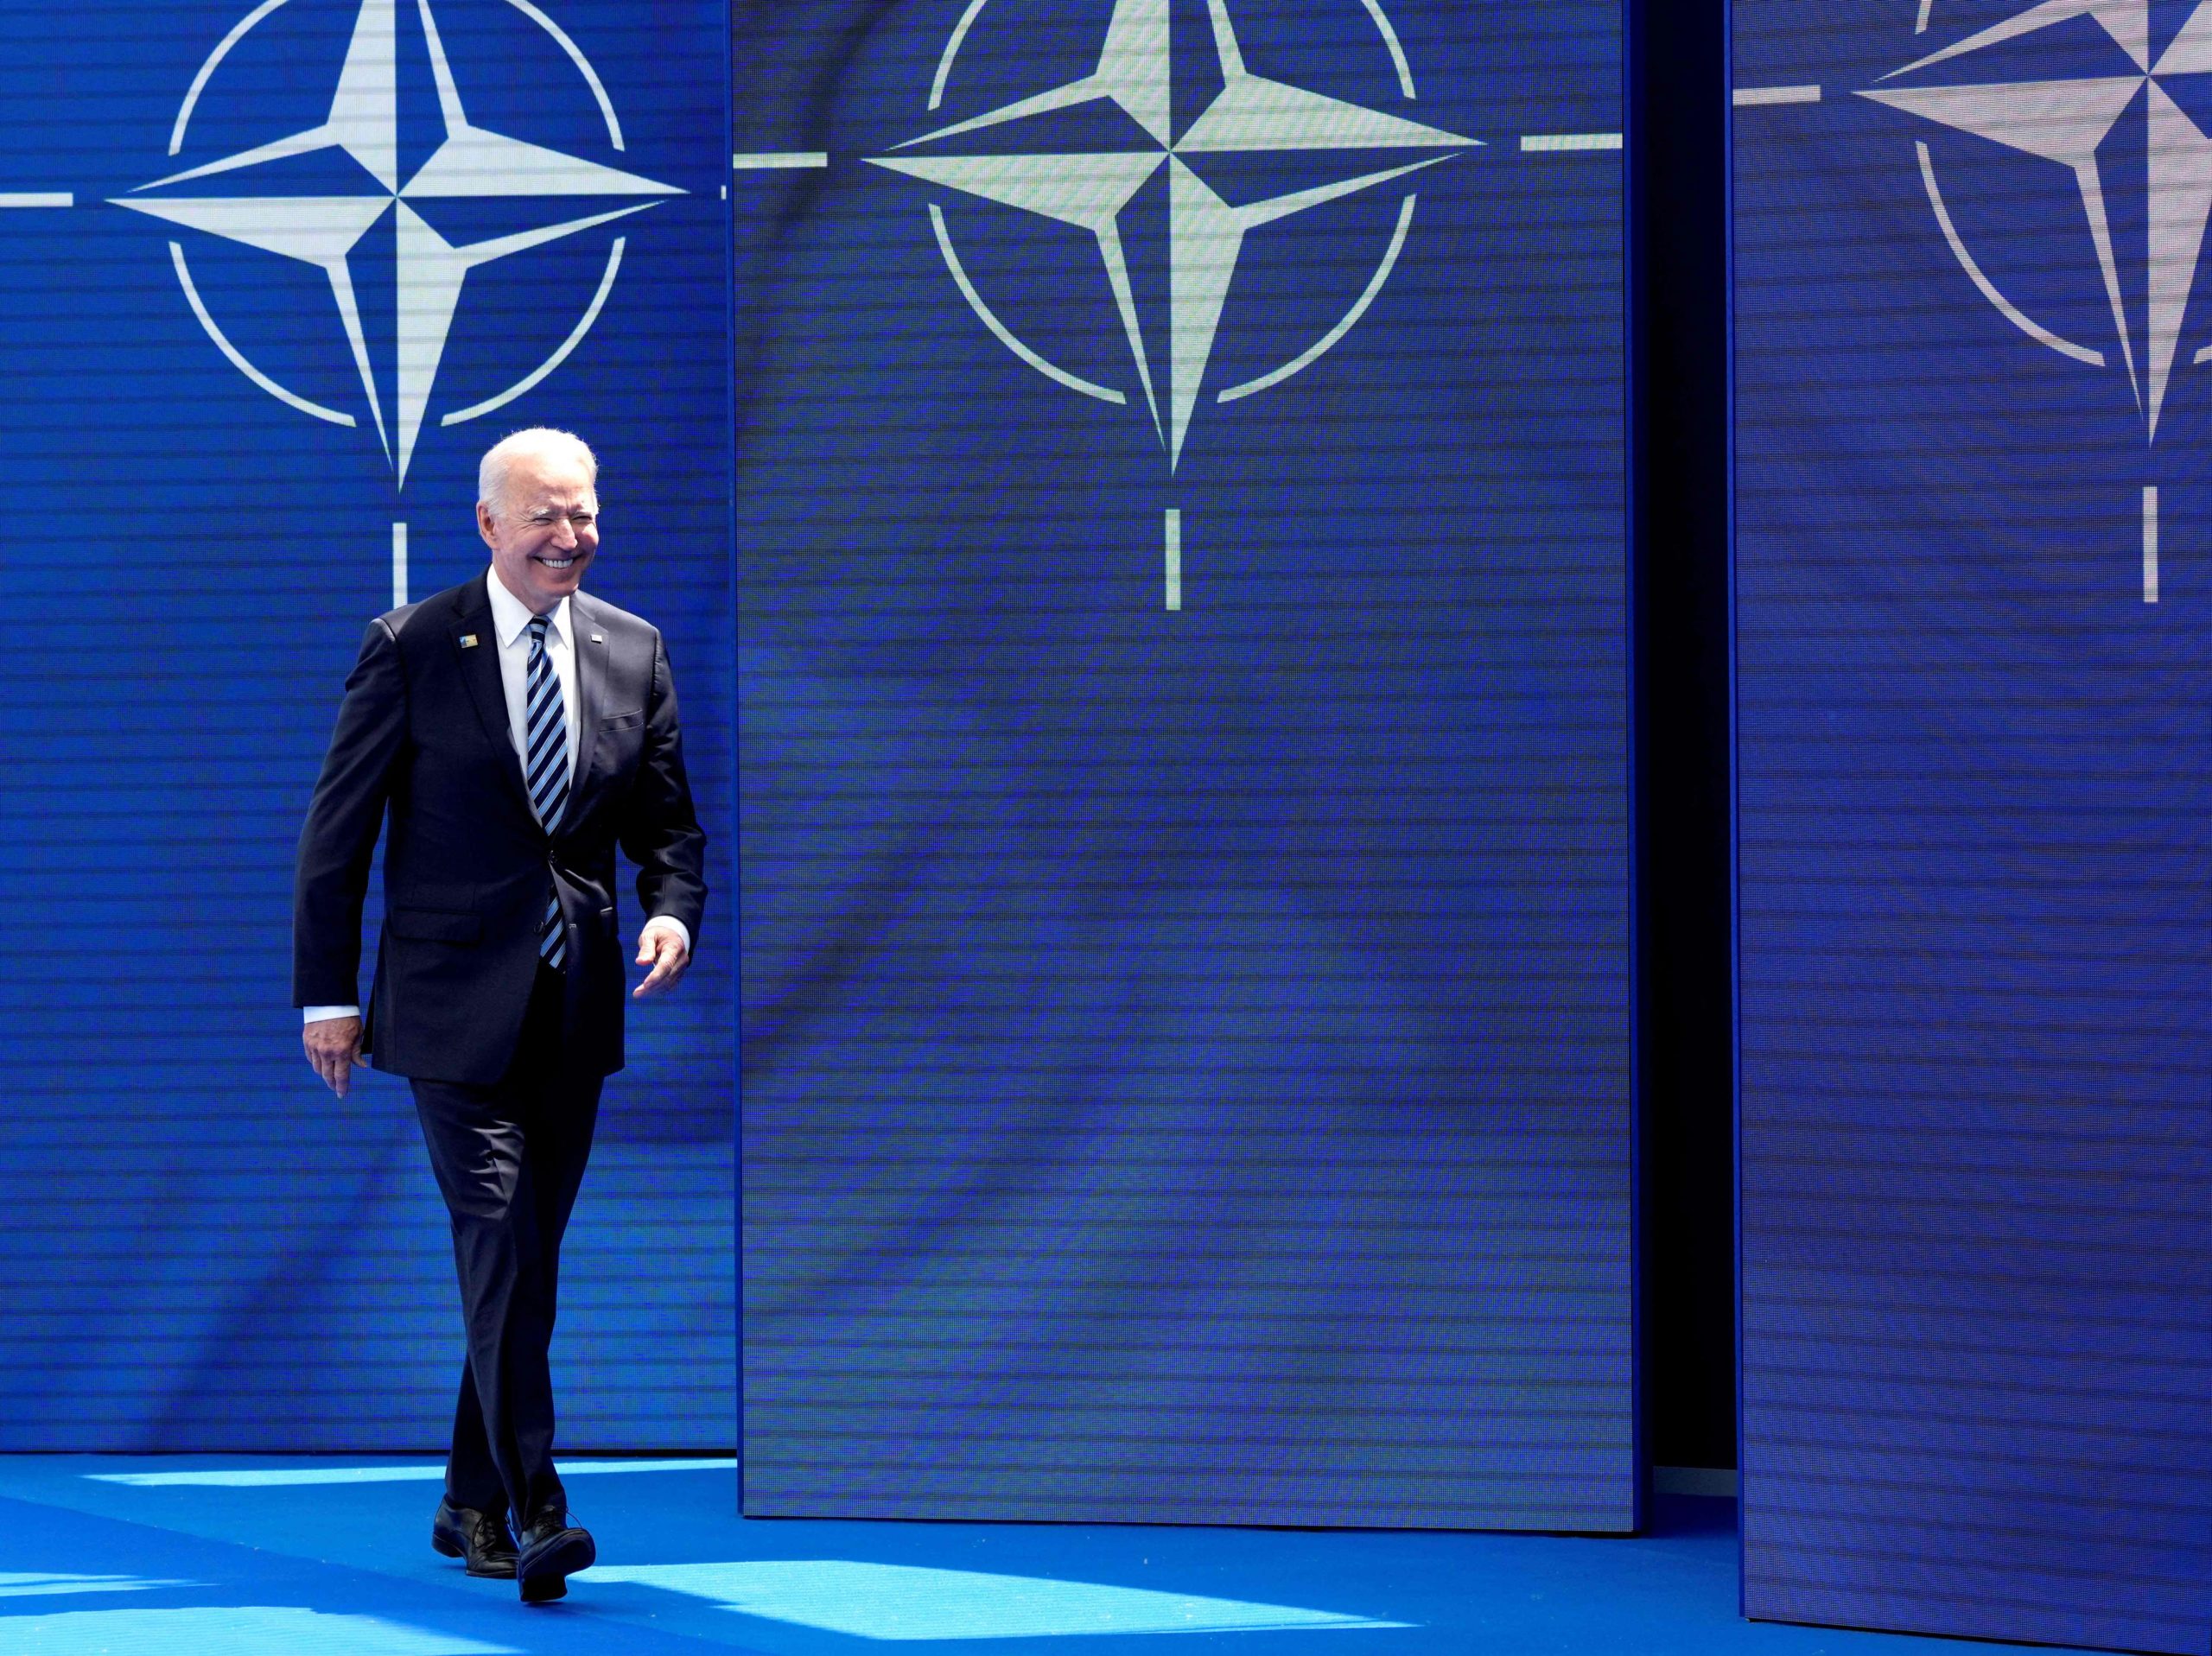 President Joe Biden arrives for the NATO summit in Brussels on Monday. (Francois Mori/Pool/AFP via Getty Images)